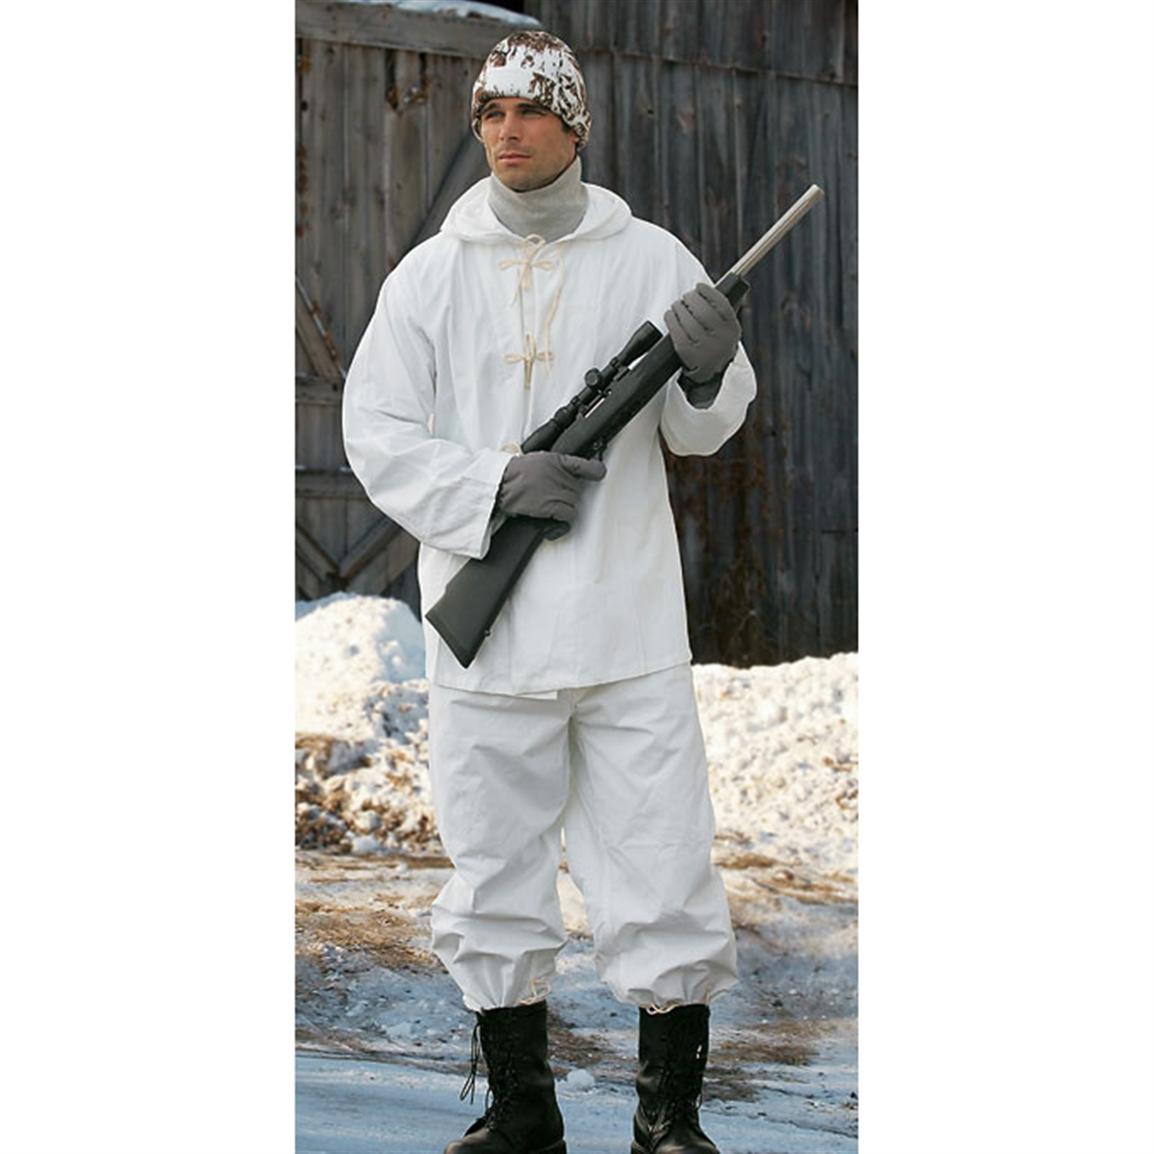 New Italian Snow Camo Suit - 85494, Athletic Wear at Sportsman's Guide